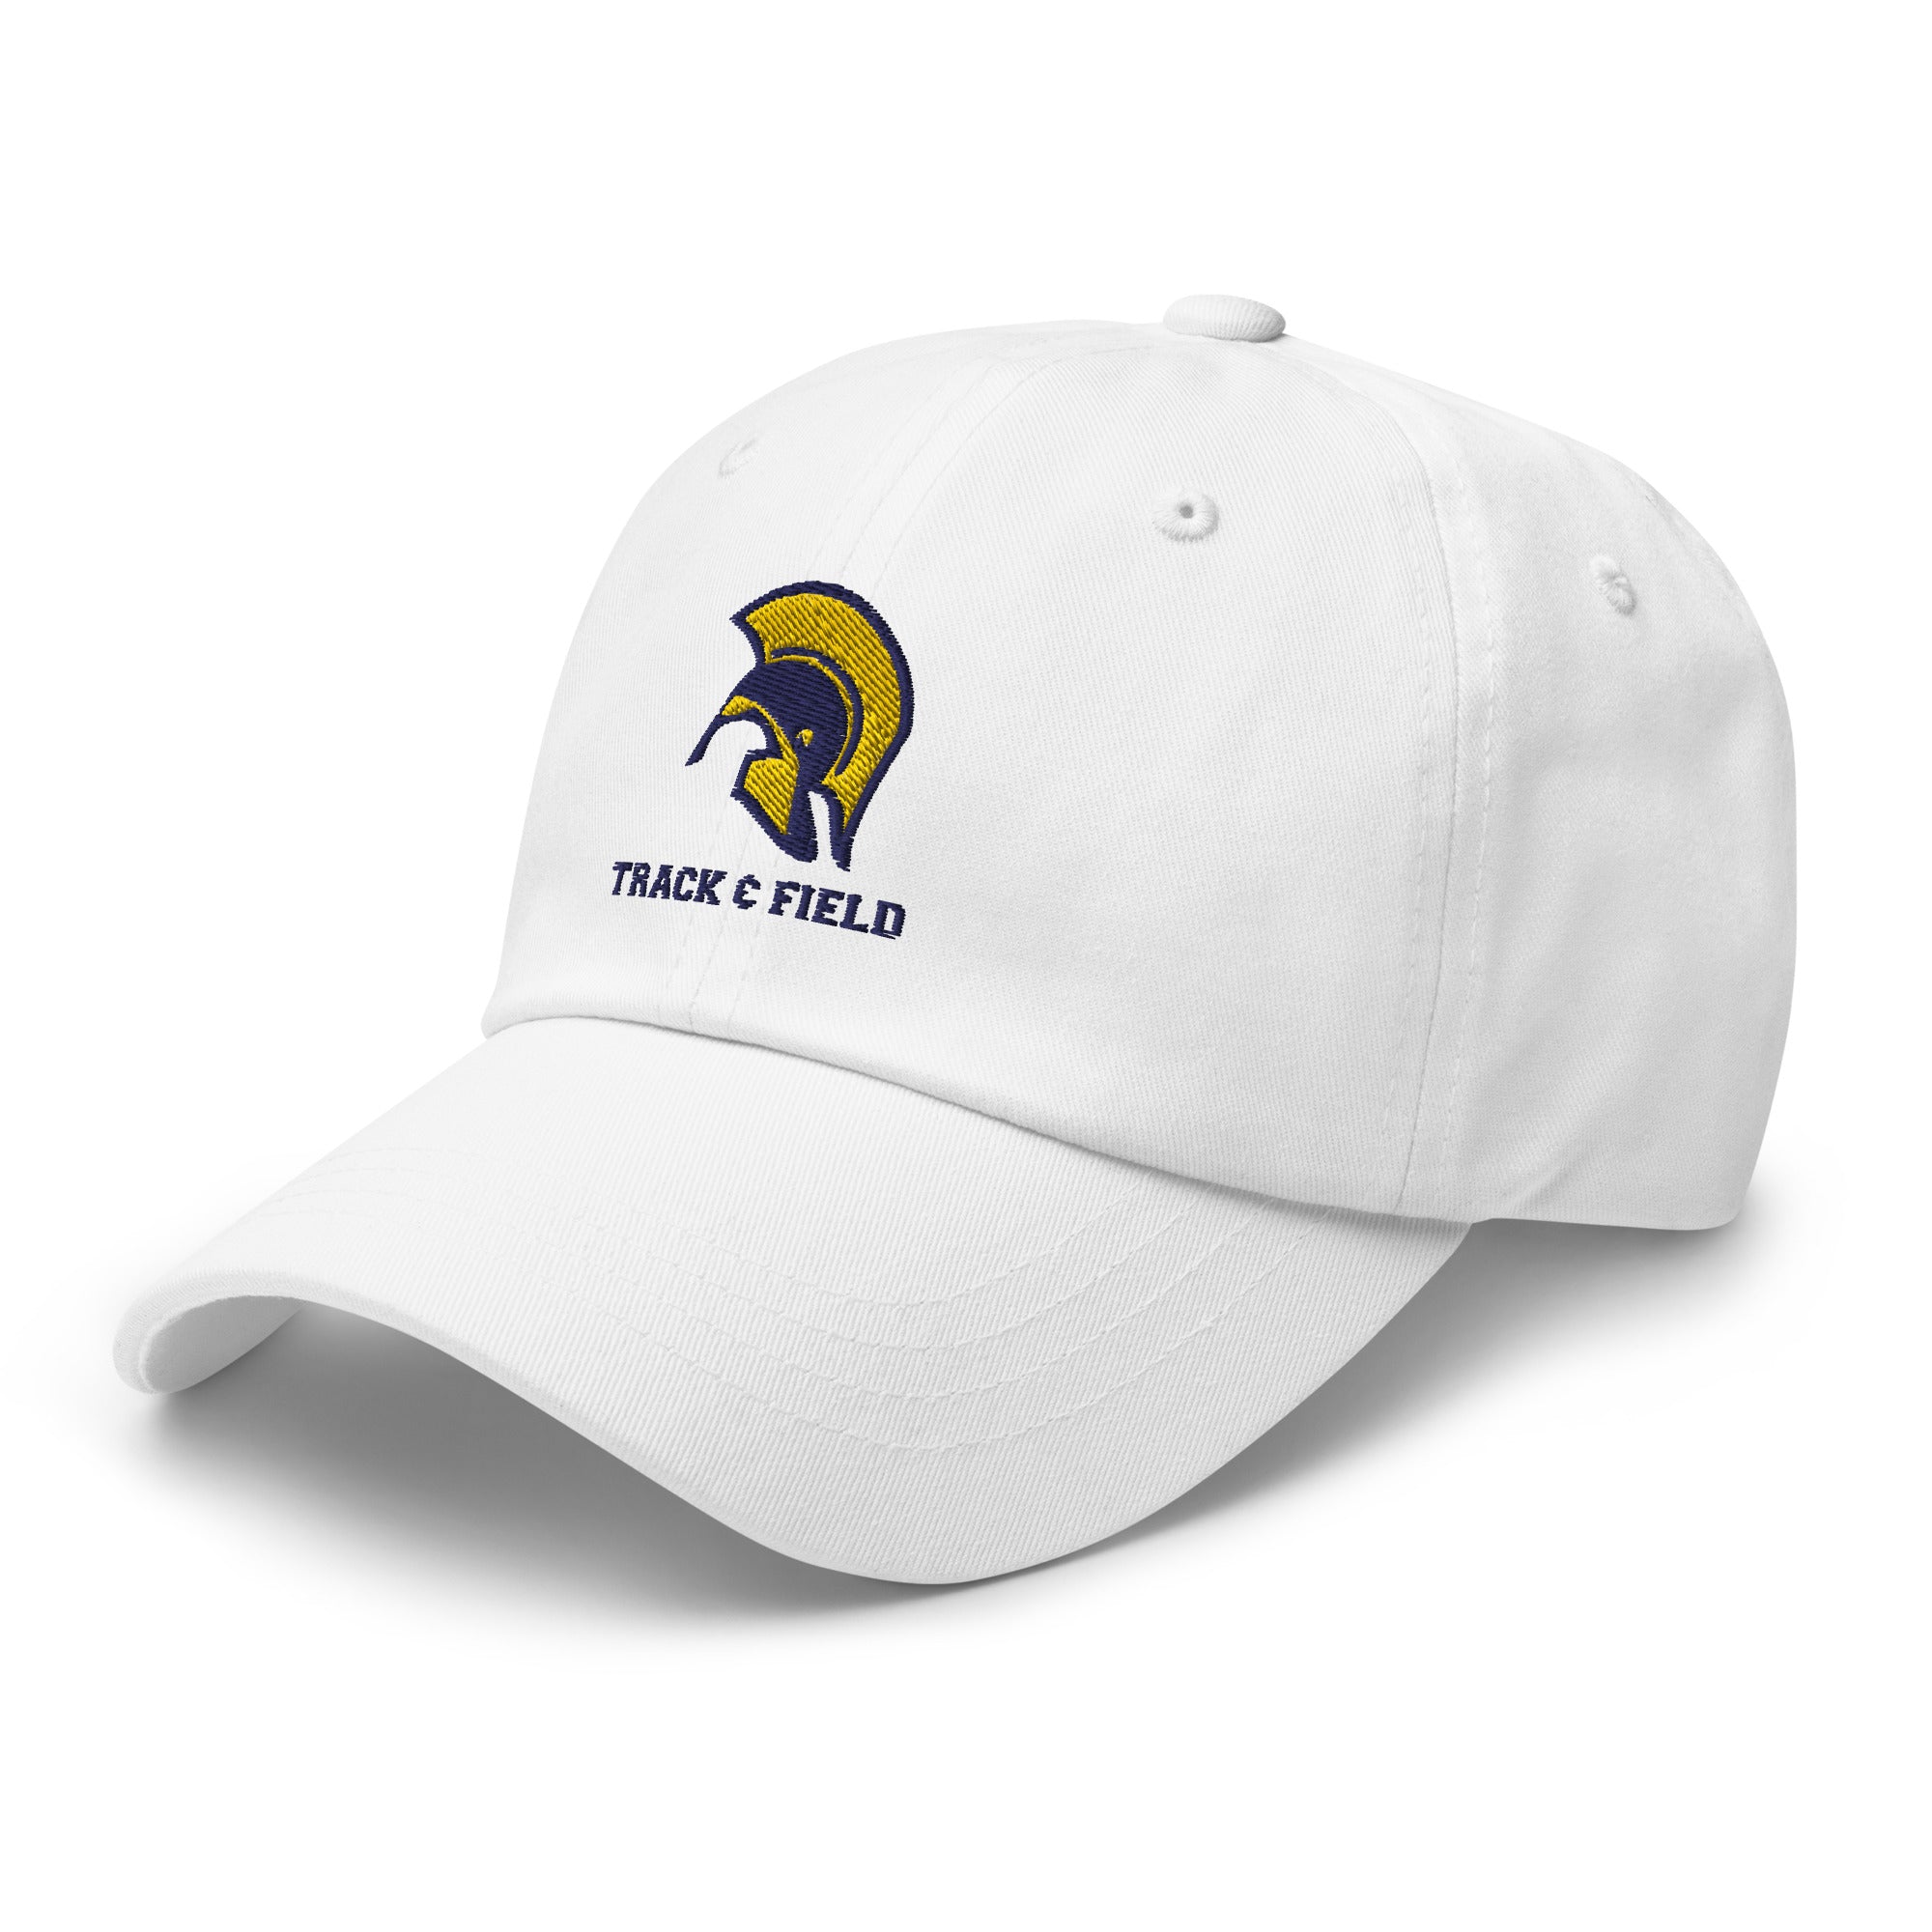 St. Mary's Dad hat